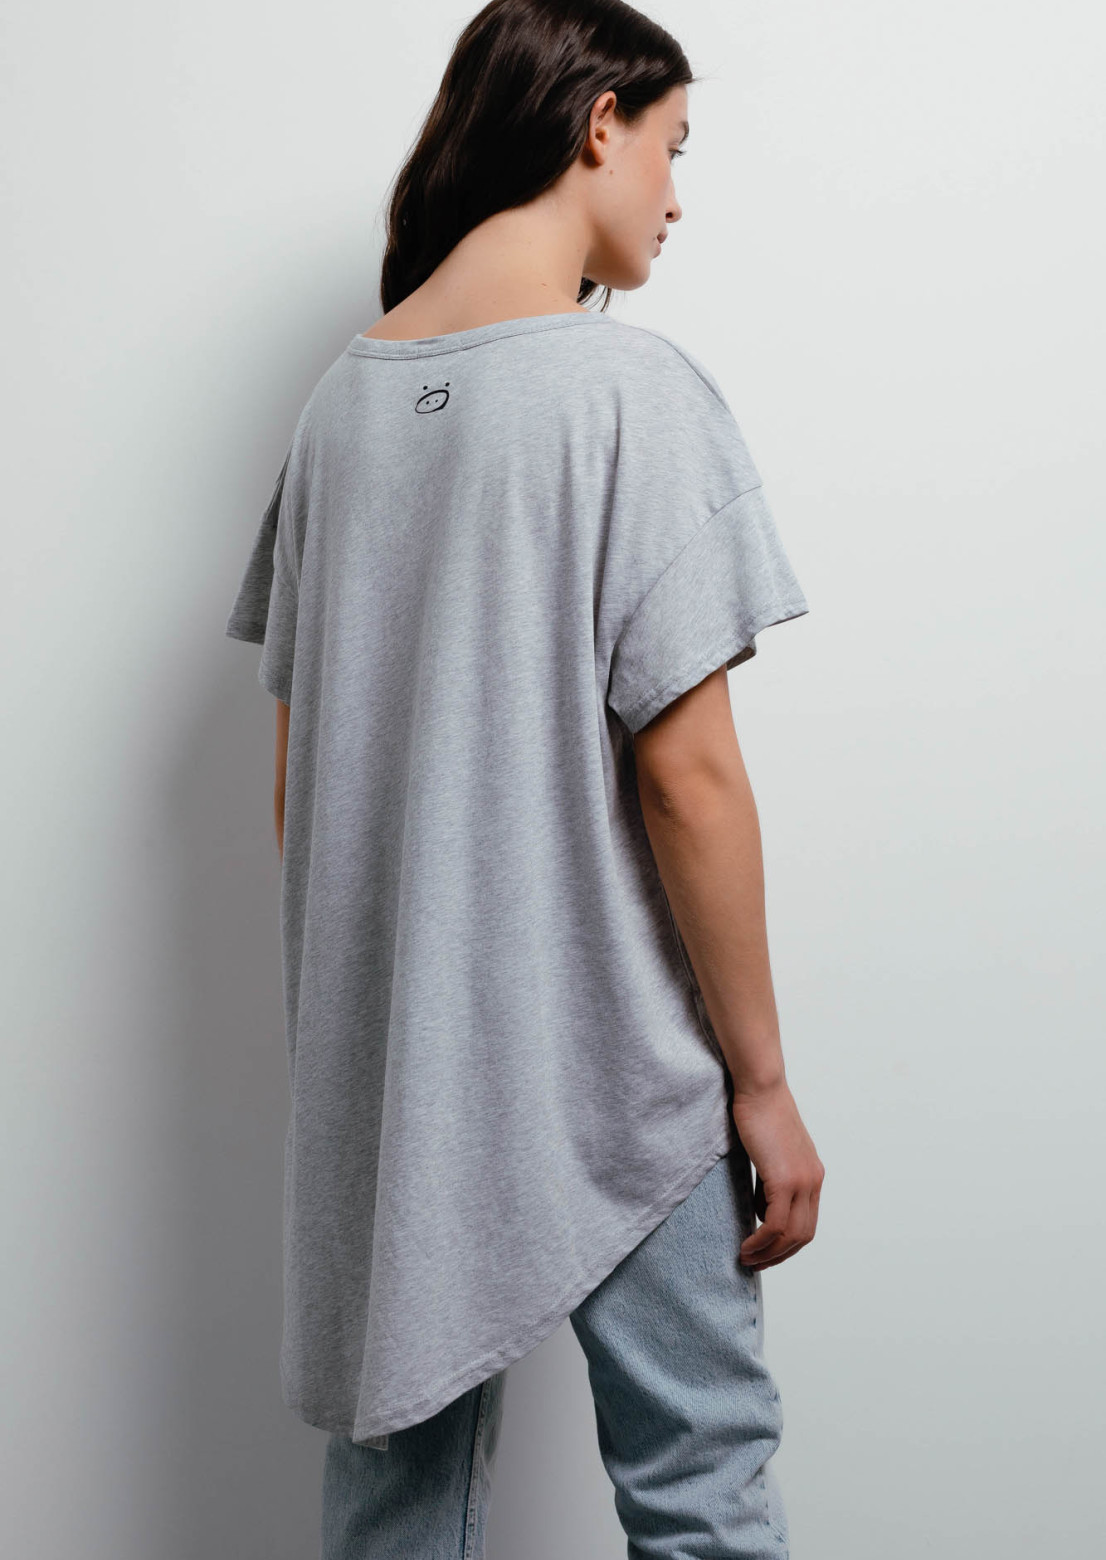 Grey melange T-shirt with a tail made of jersey